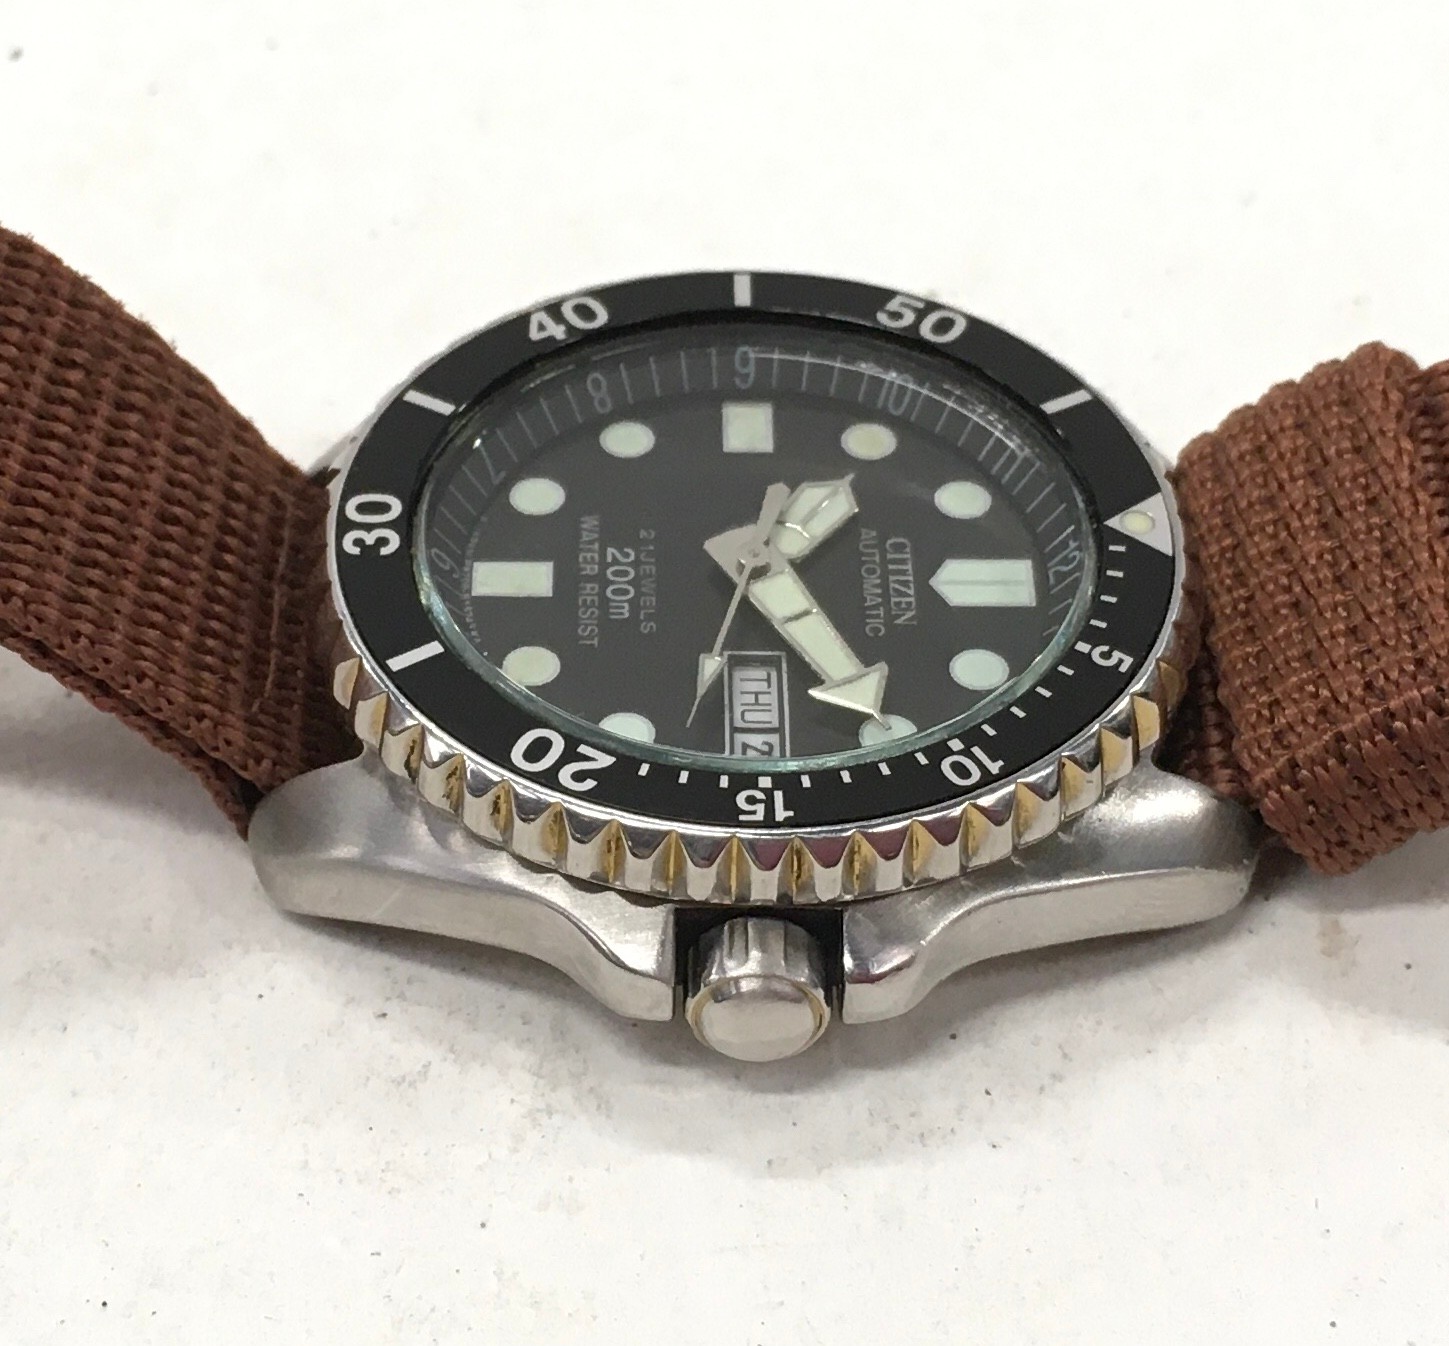 Citizen automatic gents 200m divers watch with screw down crown. Model ref 4-824521y. Seen working. - Image 3 of 4